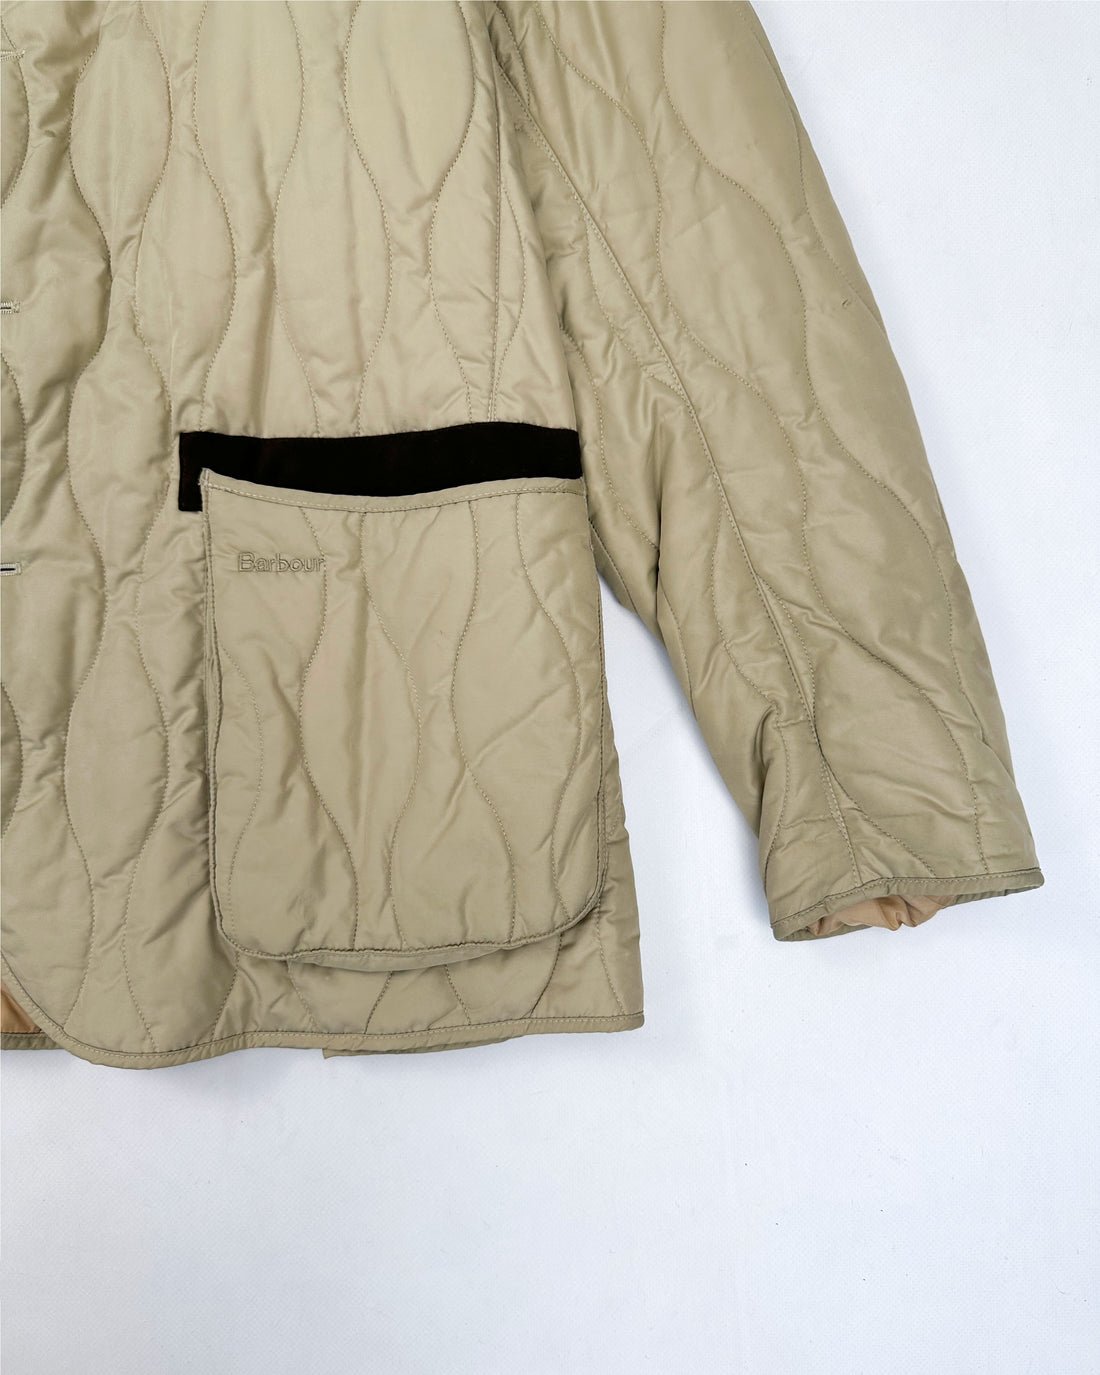 Barbour x Tokito Quilted Beige Buttoned Jacket 2019